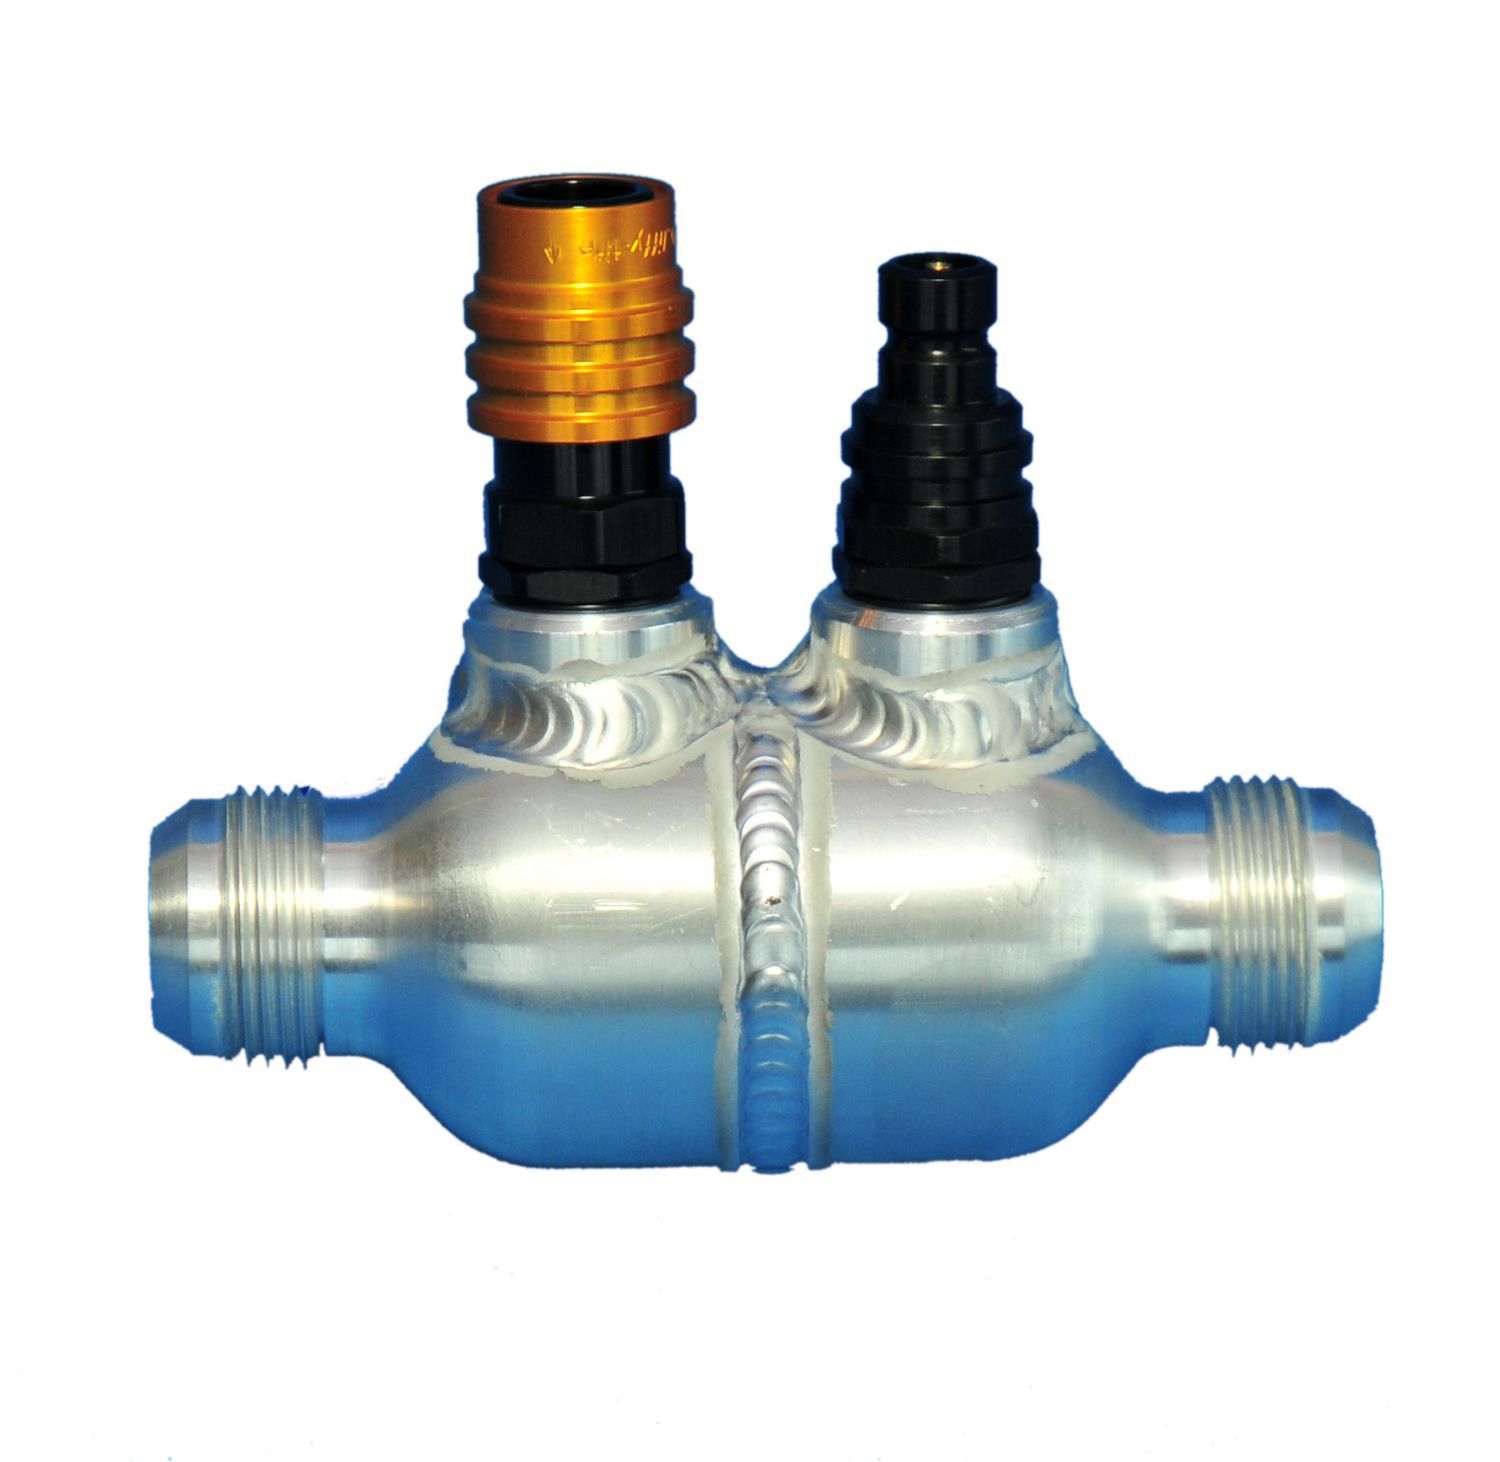 C&R Racing Radiator Check Valve, 20 AN Hose Inlet, 20 AN Hose Outlet, Two 10 AN Female Ports, Aluminum, Natural, Each